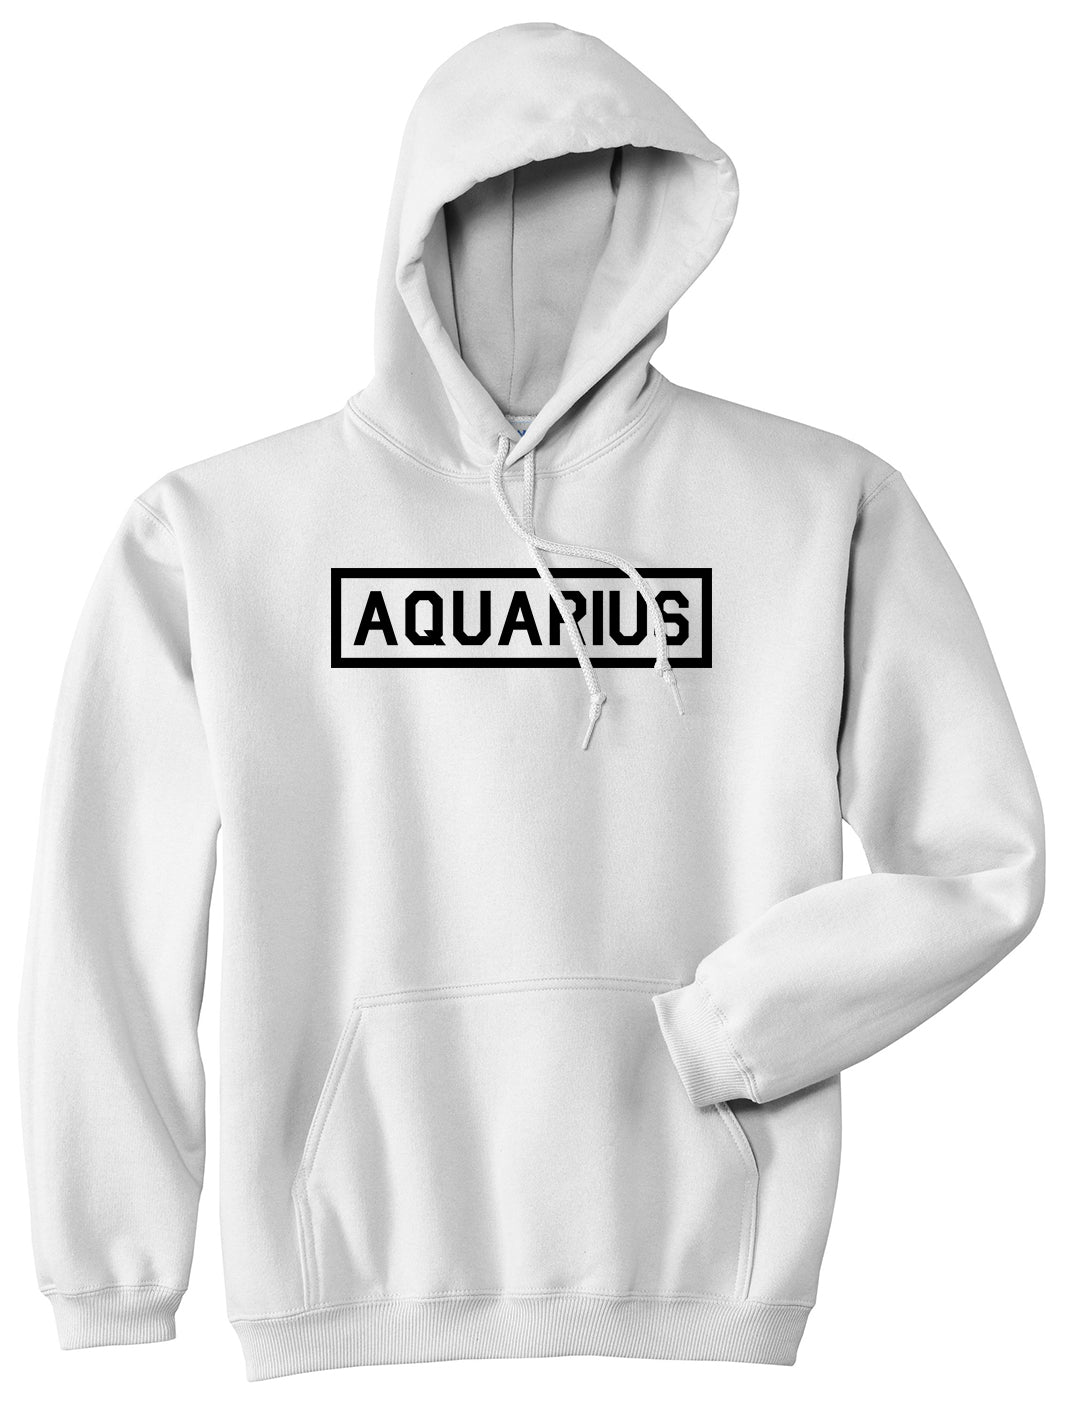 Aquarius Horoscope Sign Mens White Pullover Hoodie by KINGS OF NY